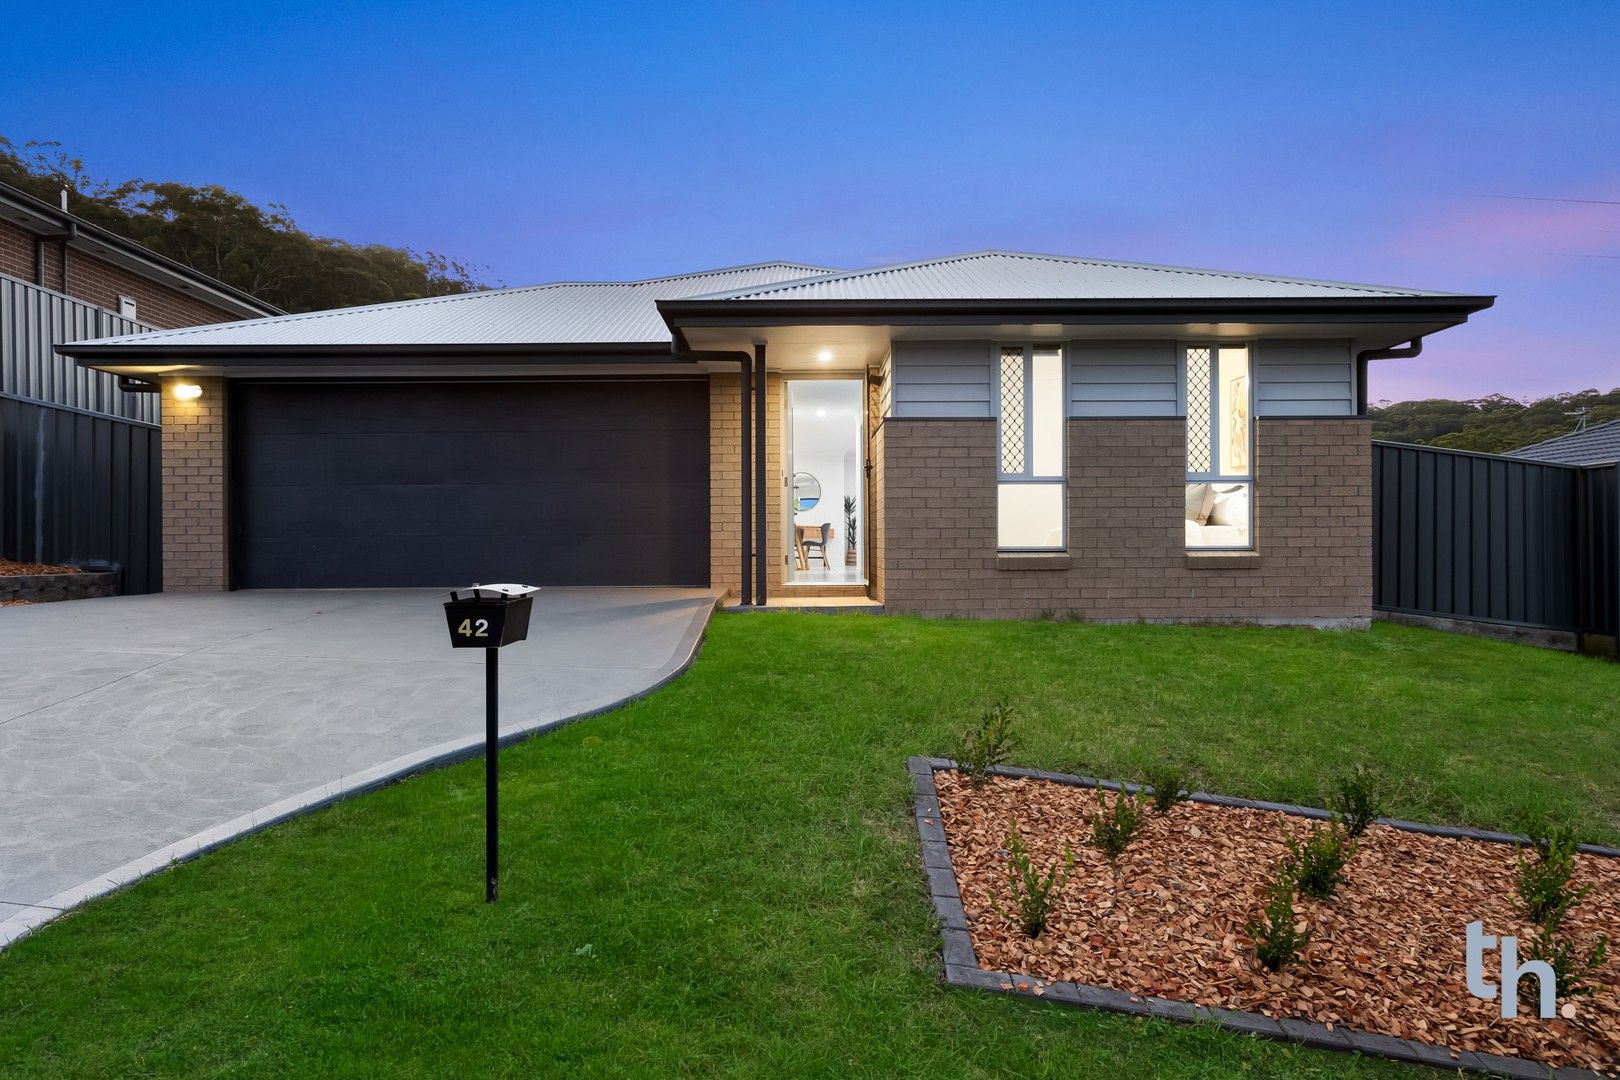 4 bedrooms House in 42 Floresta Crescent CAMERON PARK NSW, 2285